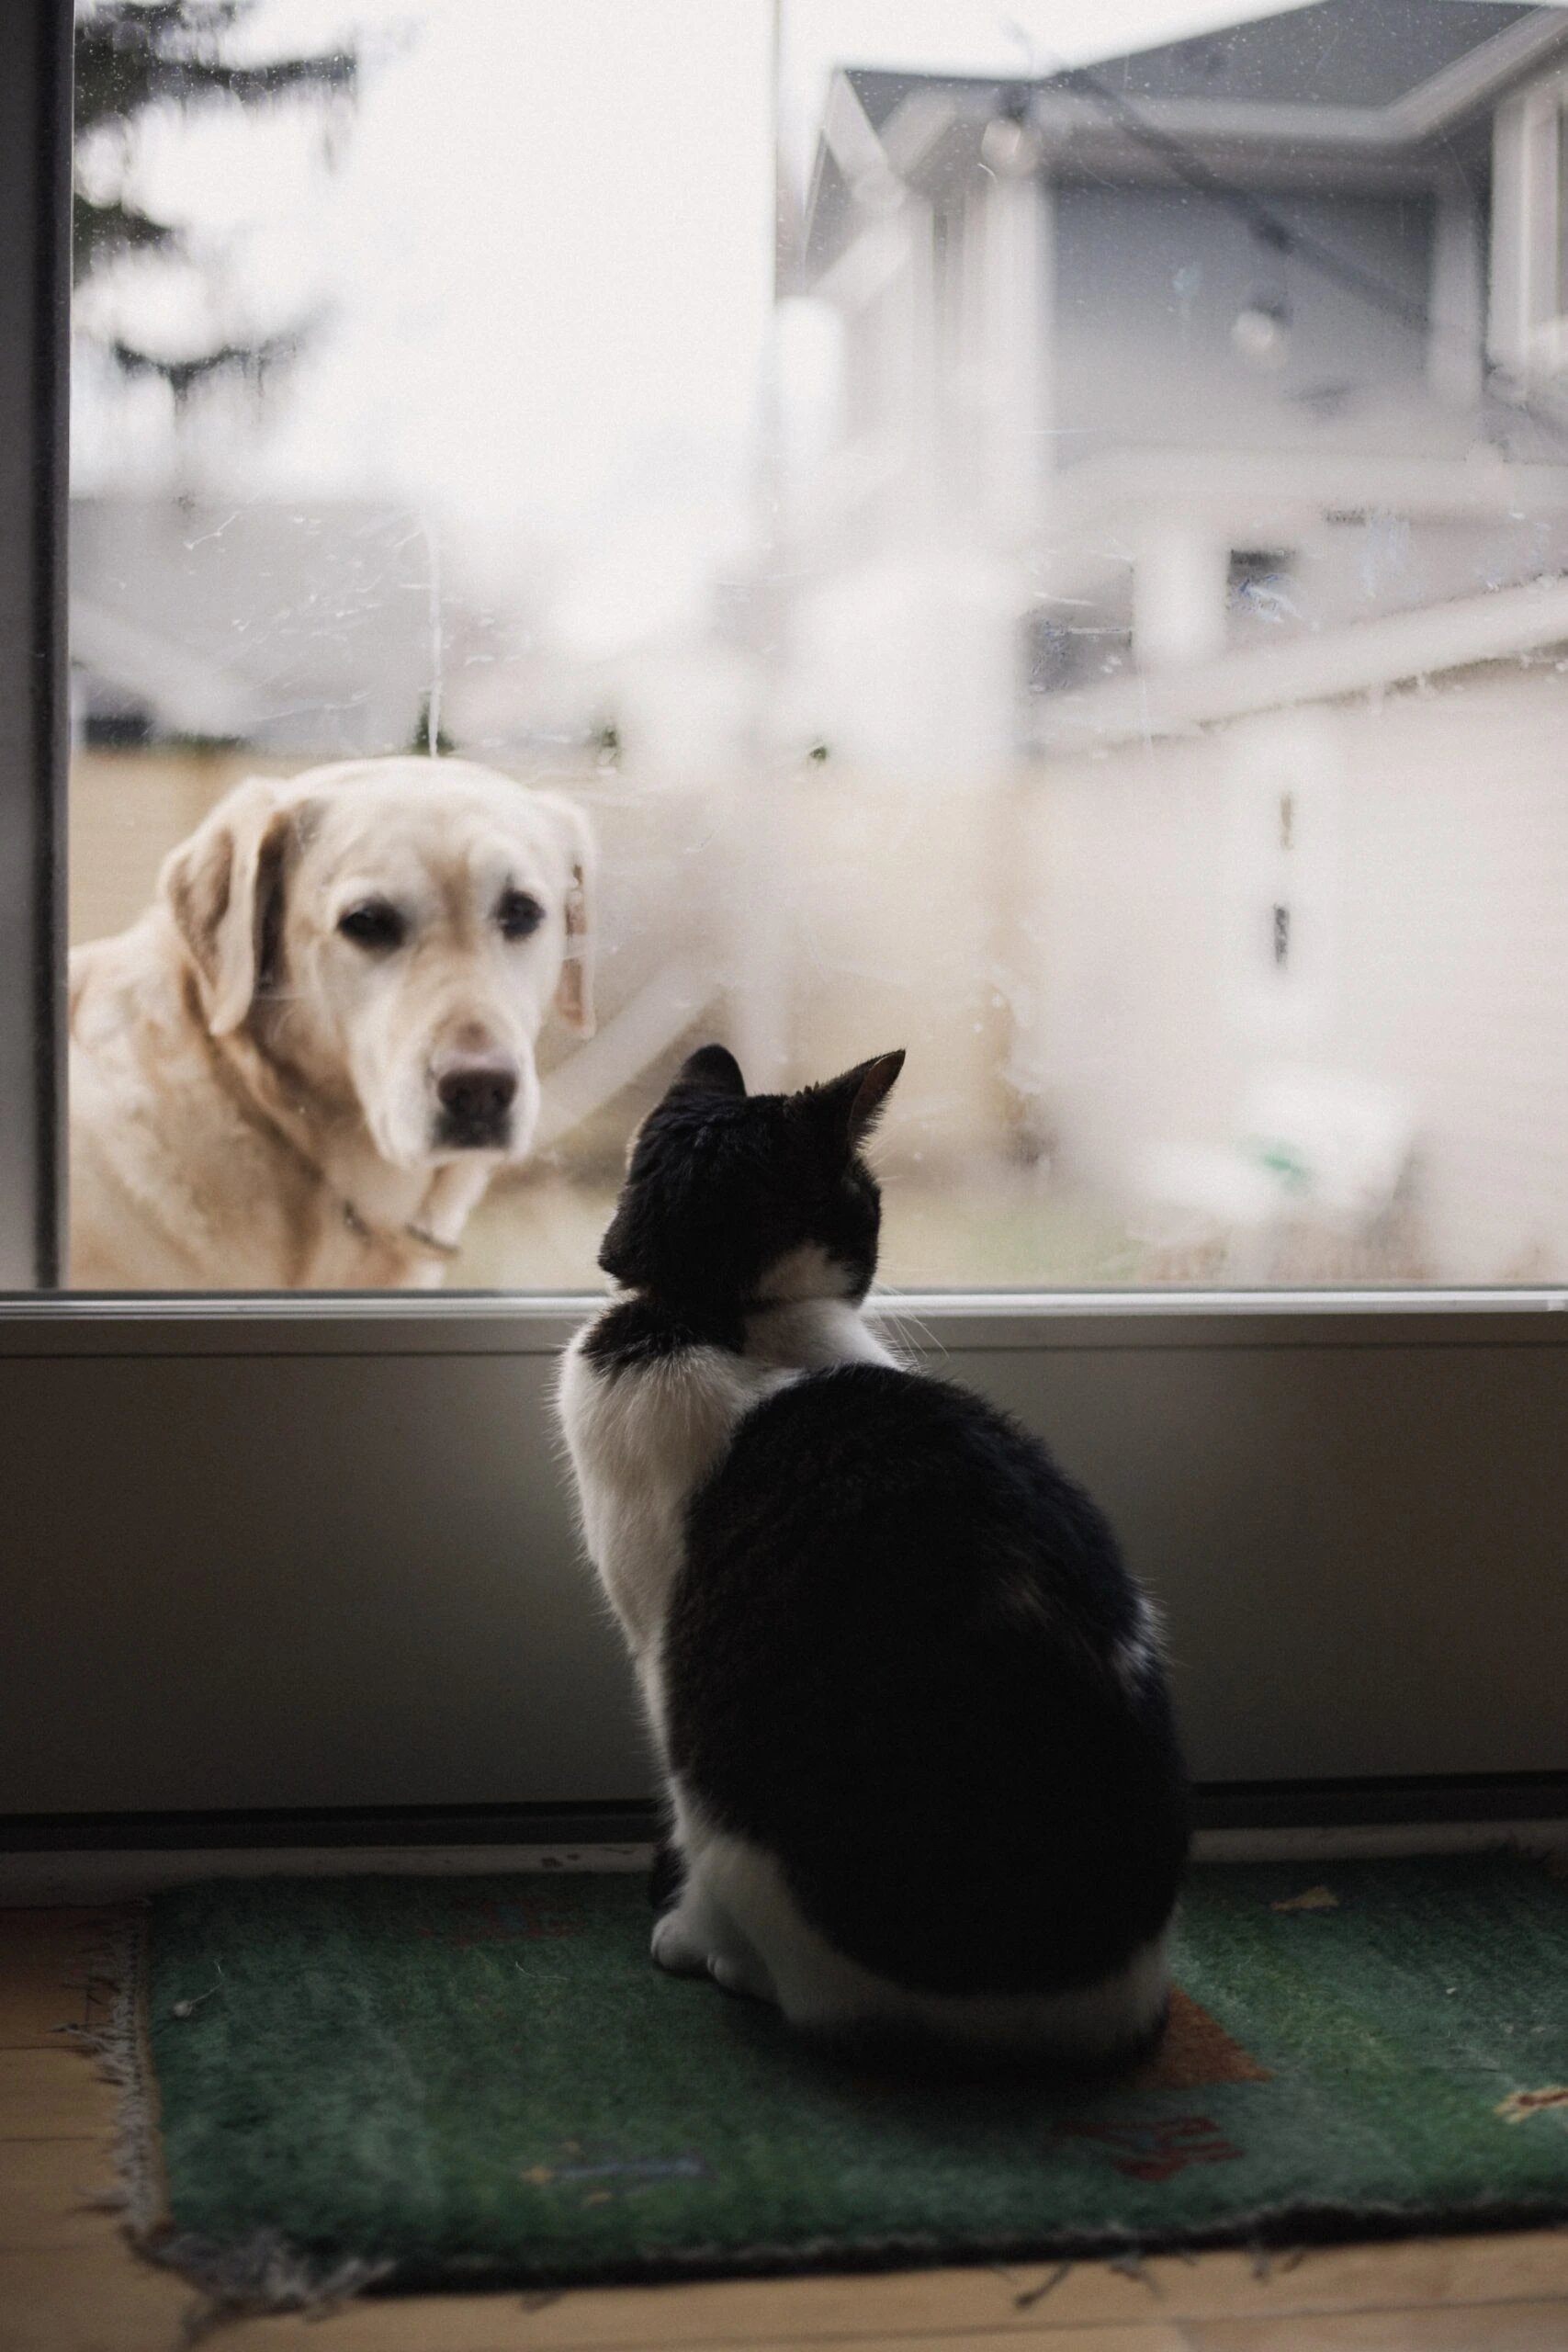 alexis-chloe-yellow lab outside looking thru window at black and white cat inside-unsplash-1-scaled